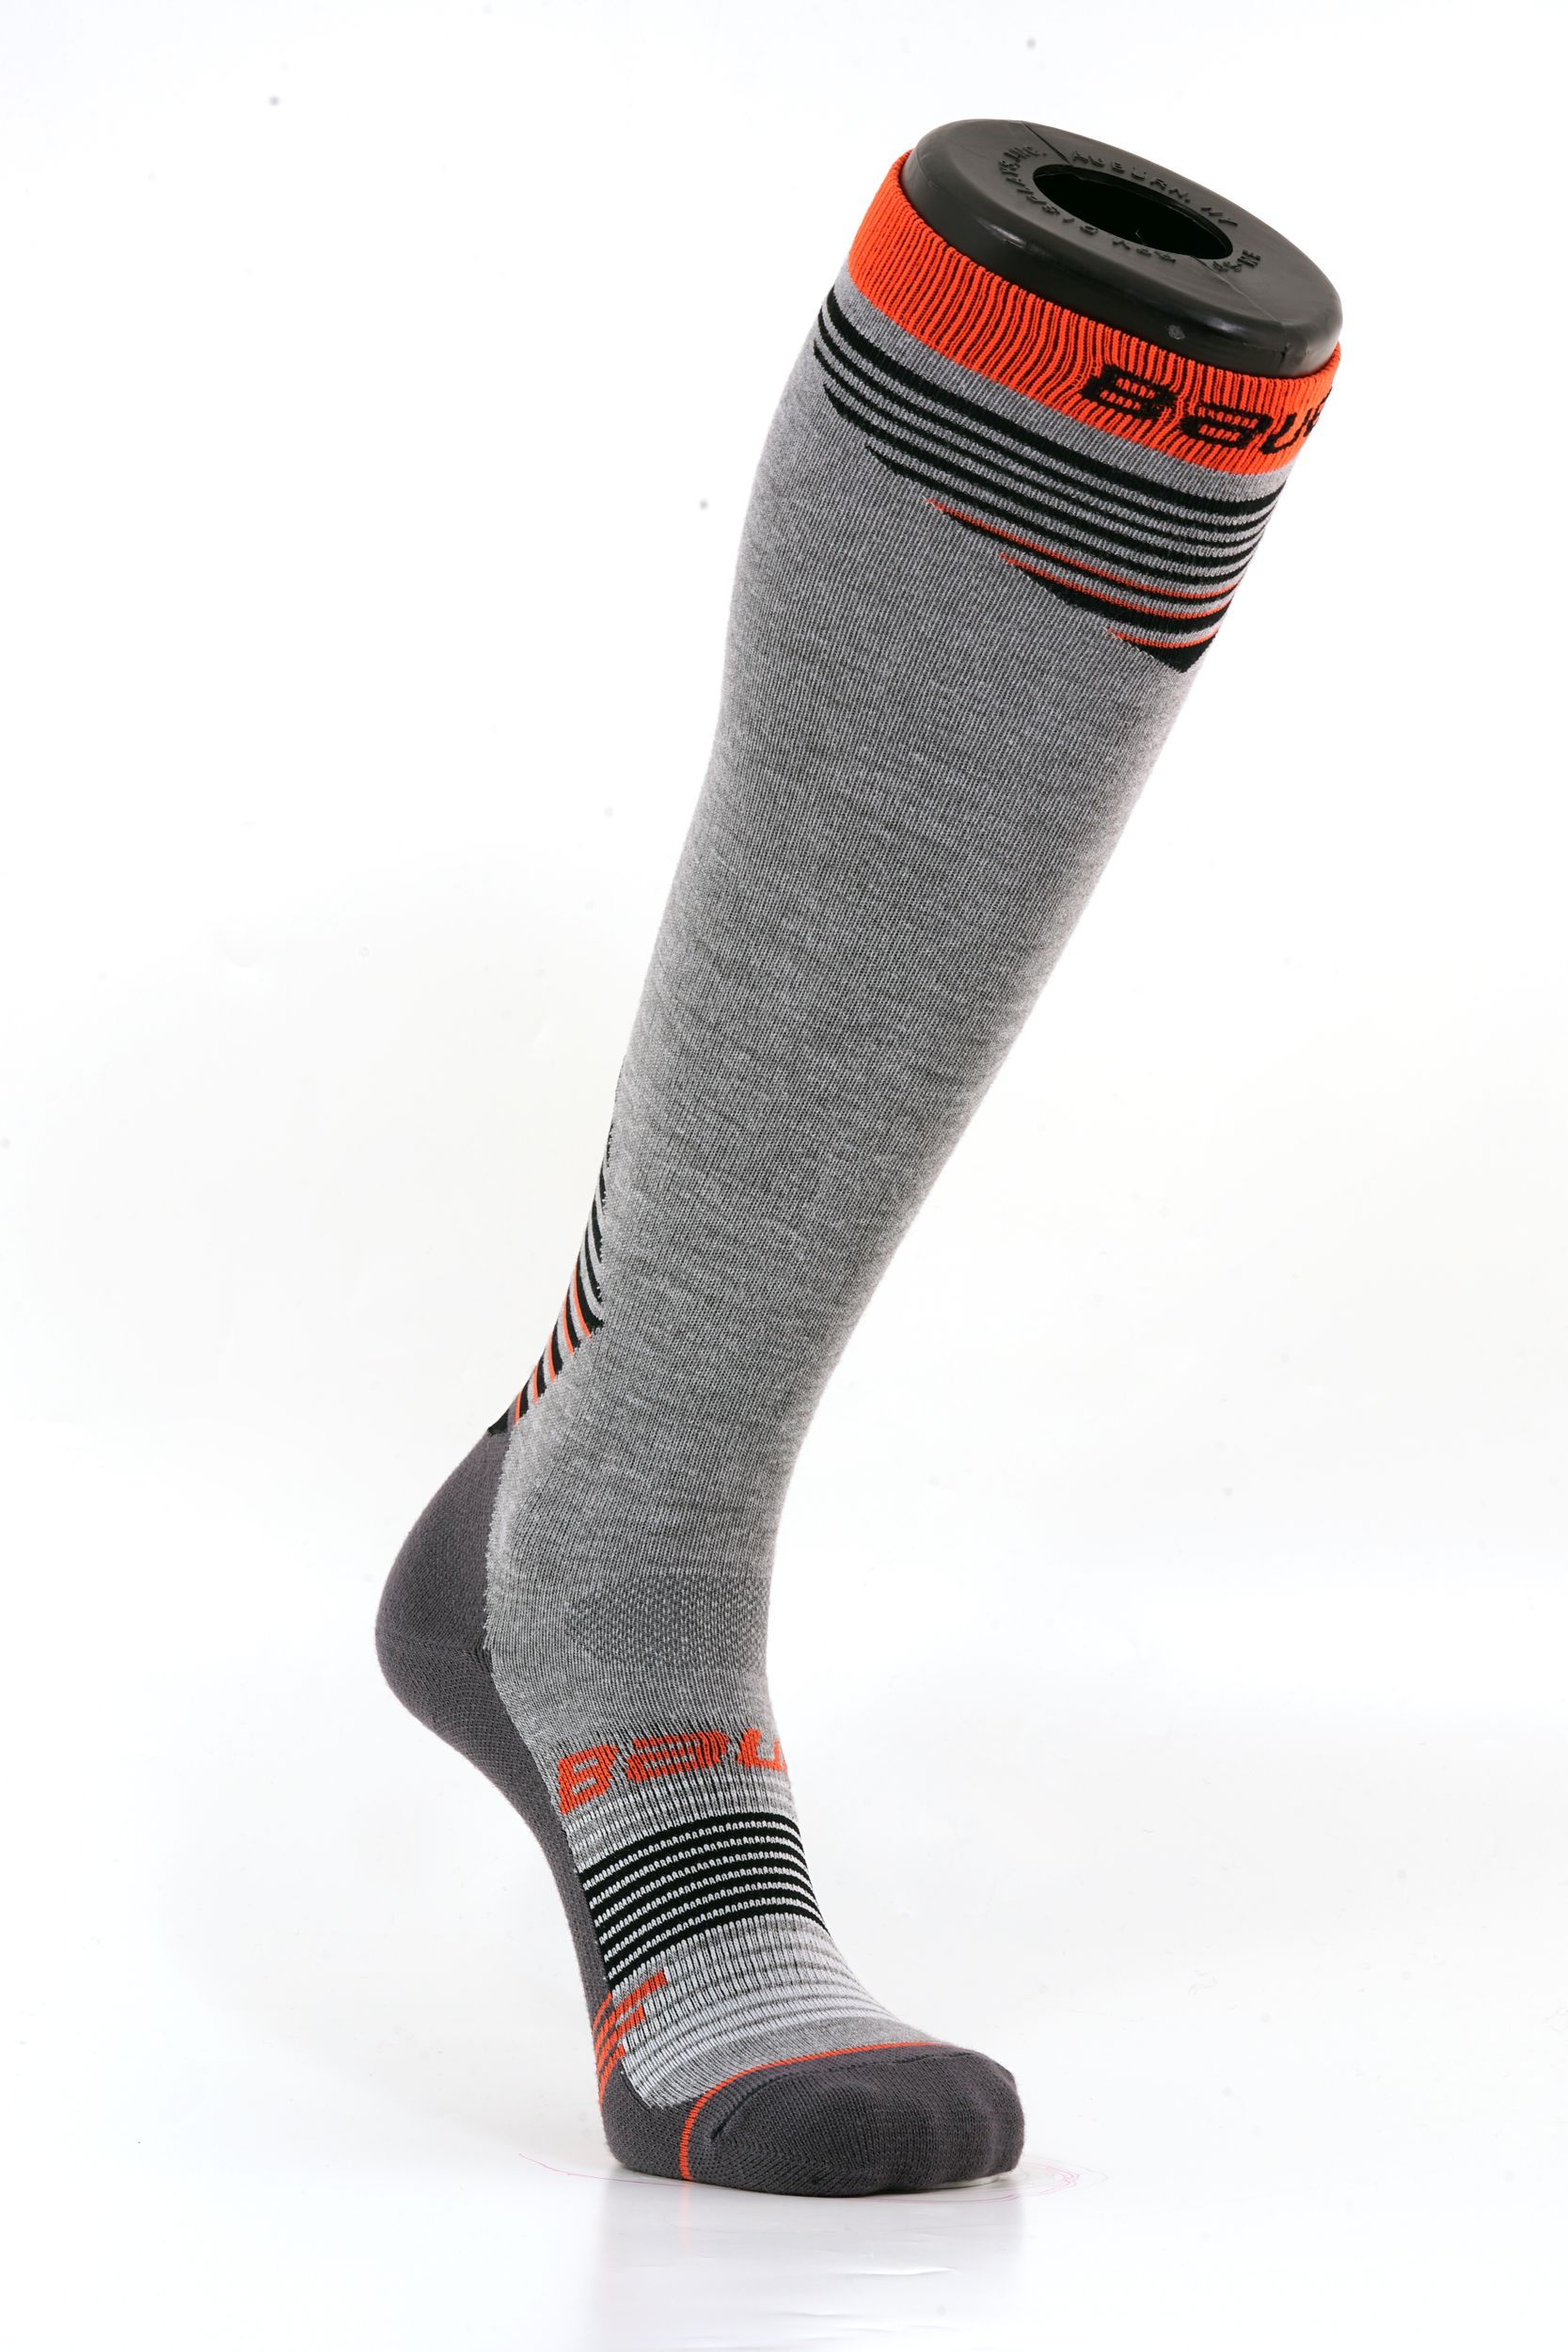 Image of Bauer Warmth Tall Skate Socks